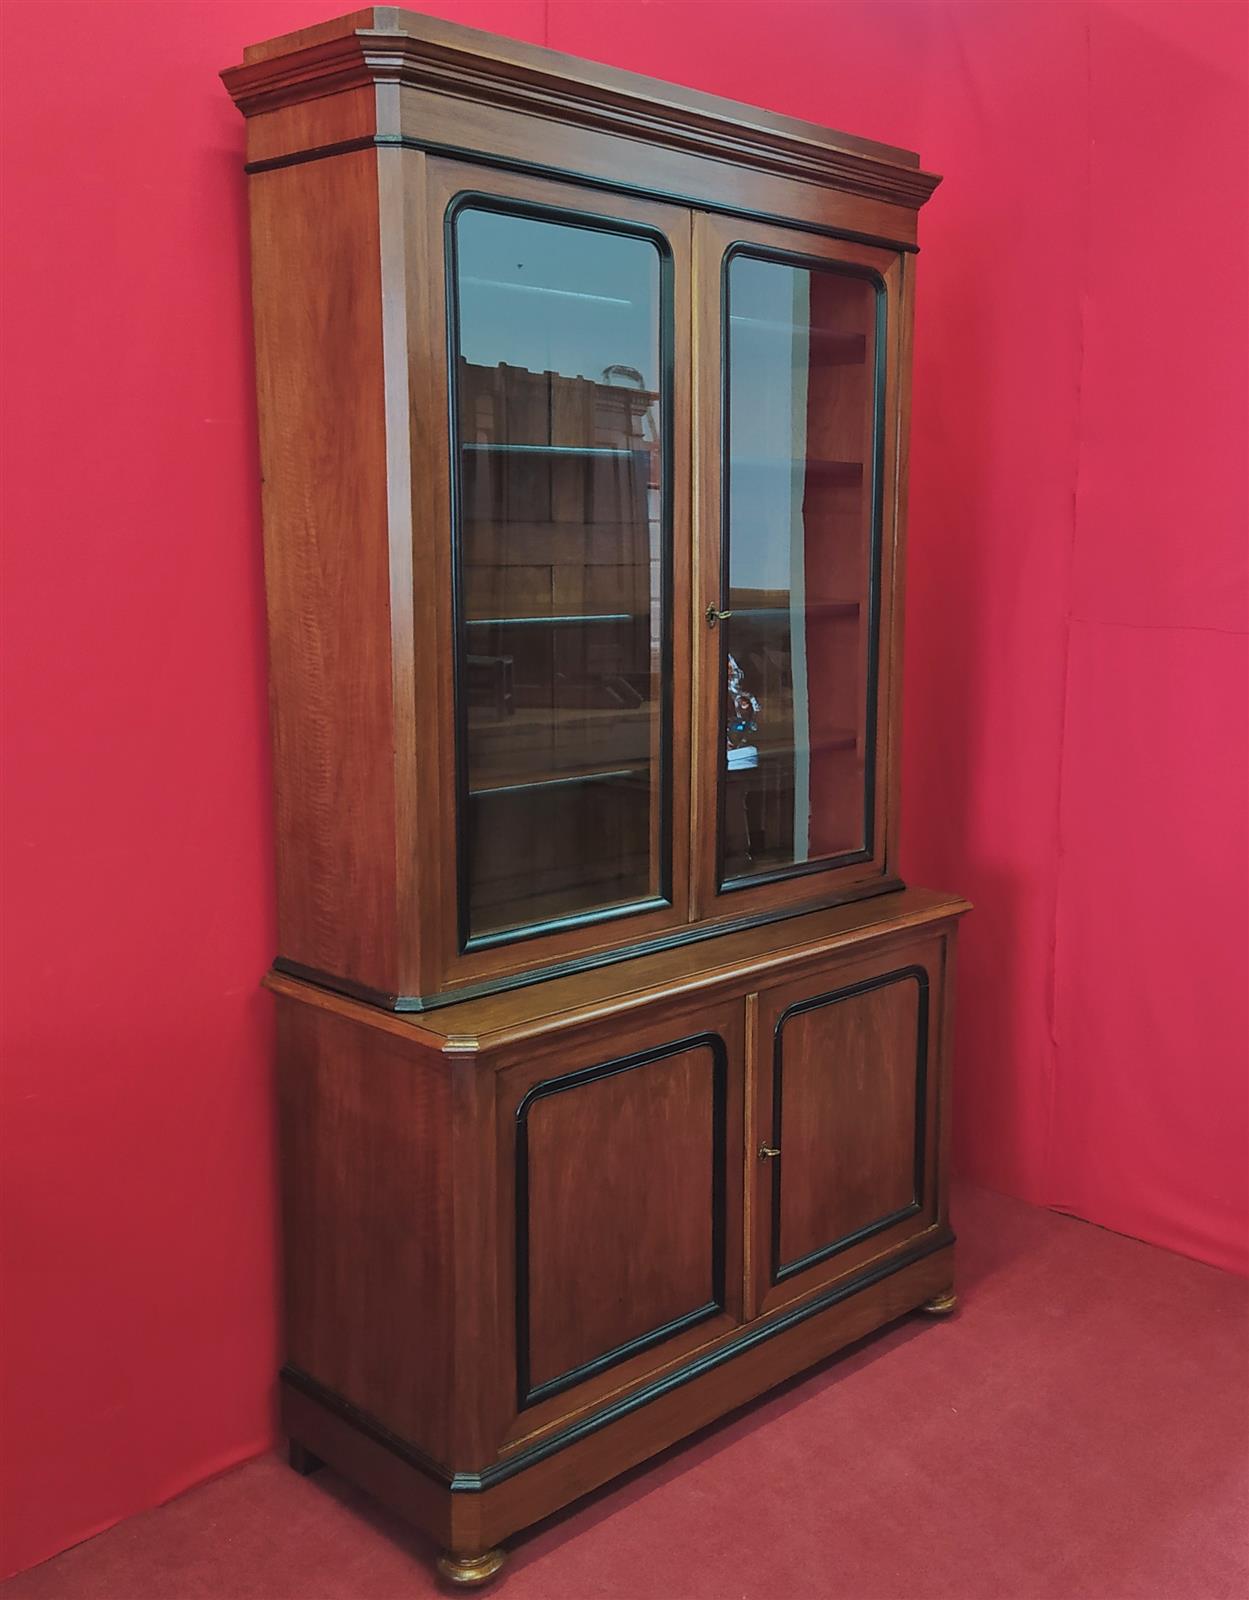 Small two-door bookcase